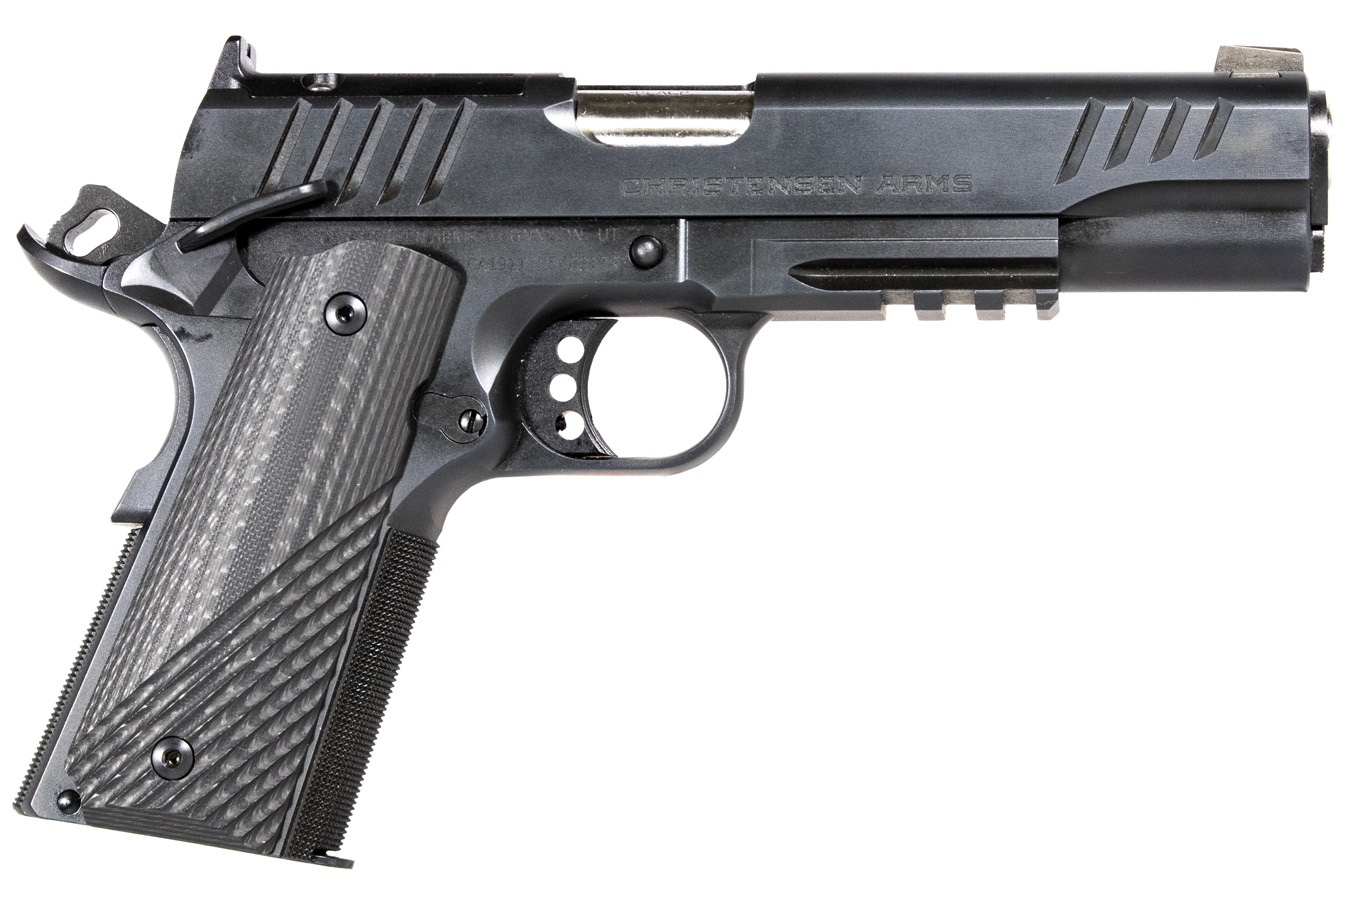 CA1911 45 ACP PISTOL WITH 5 INCH BARREL AND PICATINNY RAIL